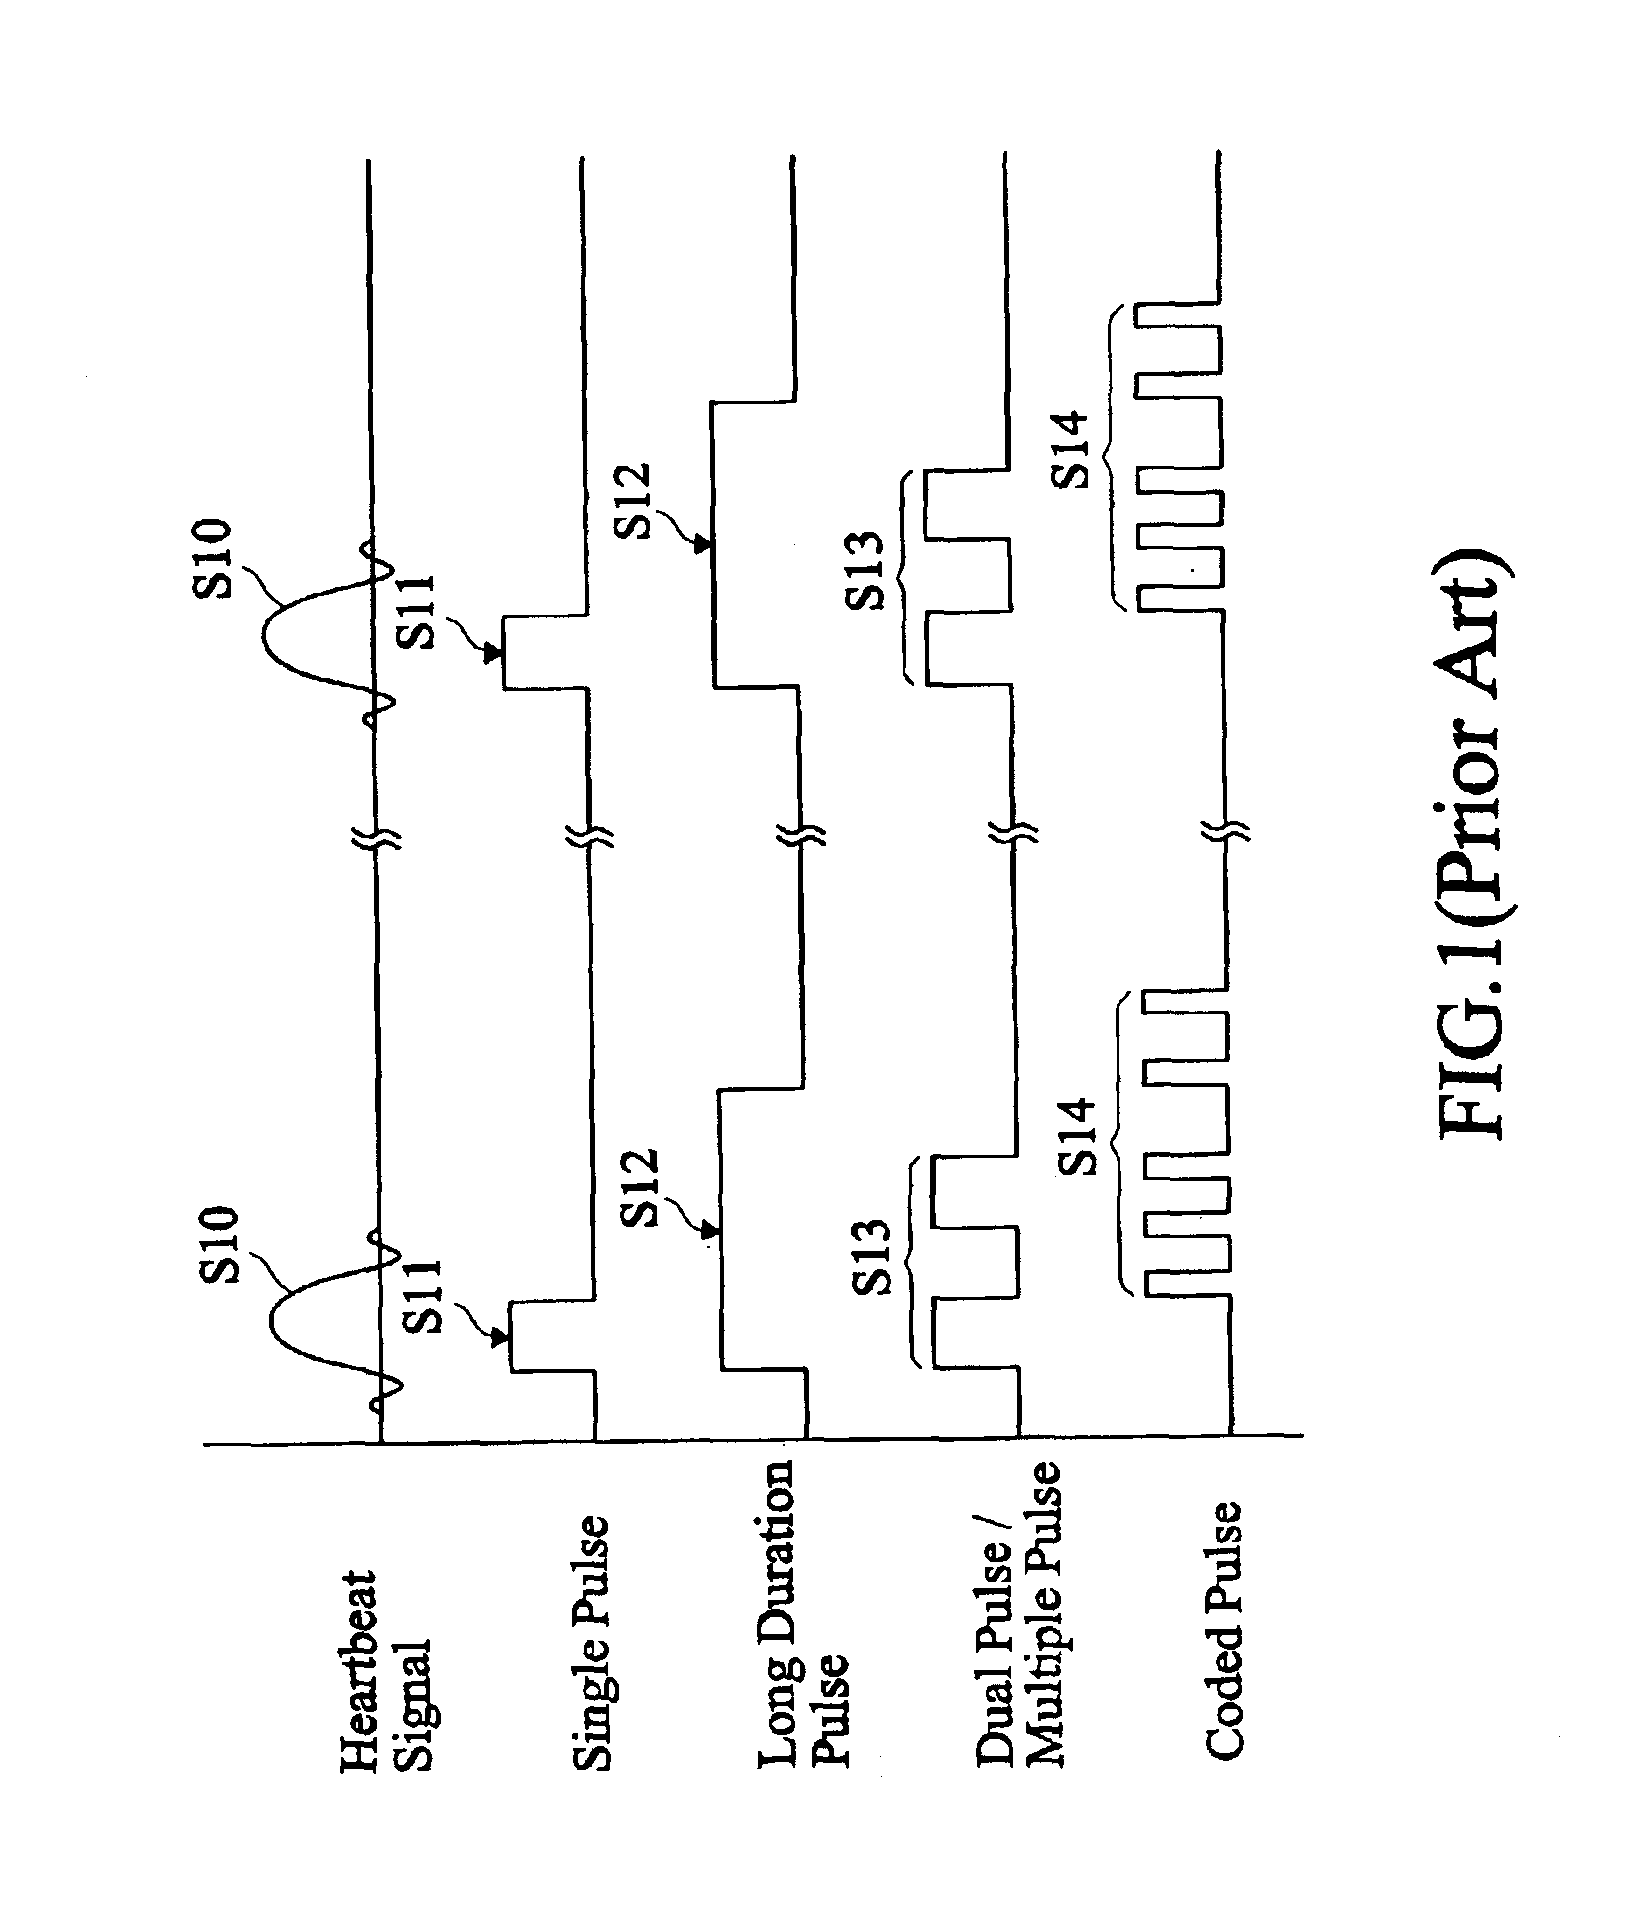 Pulse data coding method for wireless signal transmitting and receiving devices